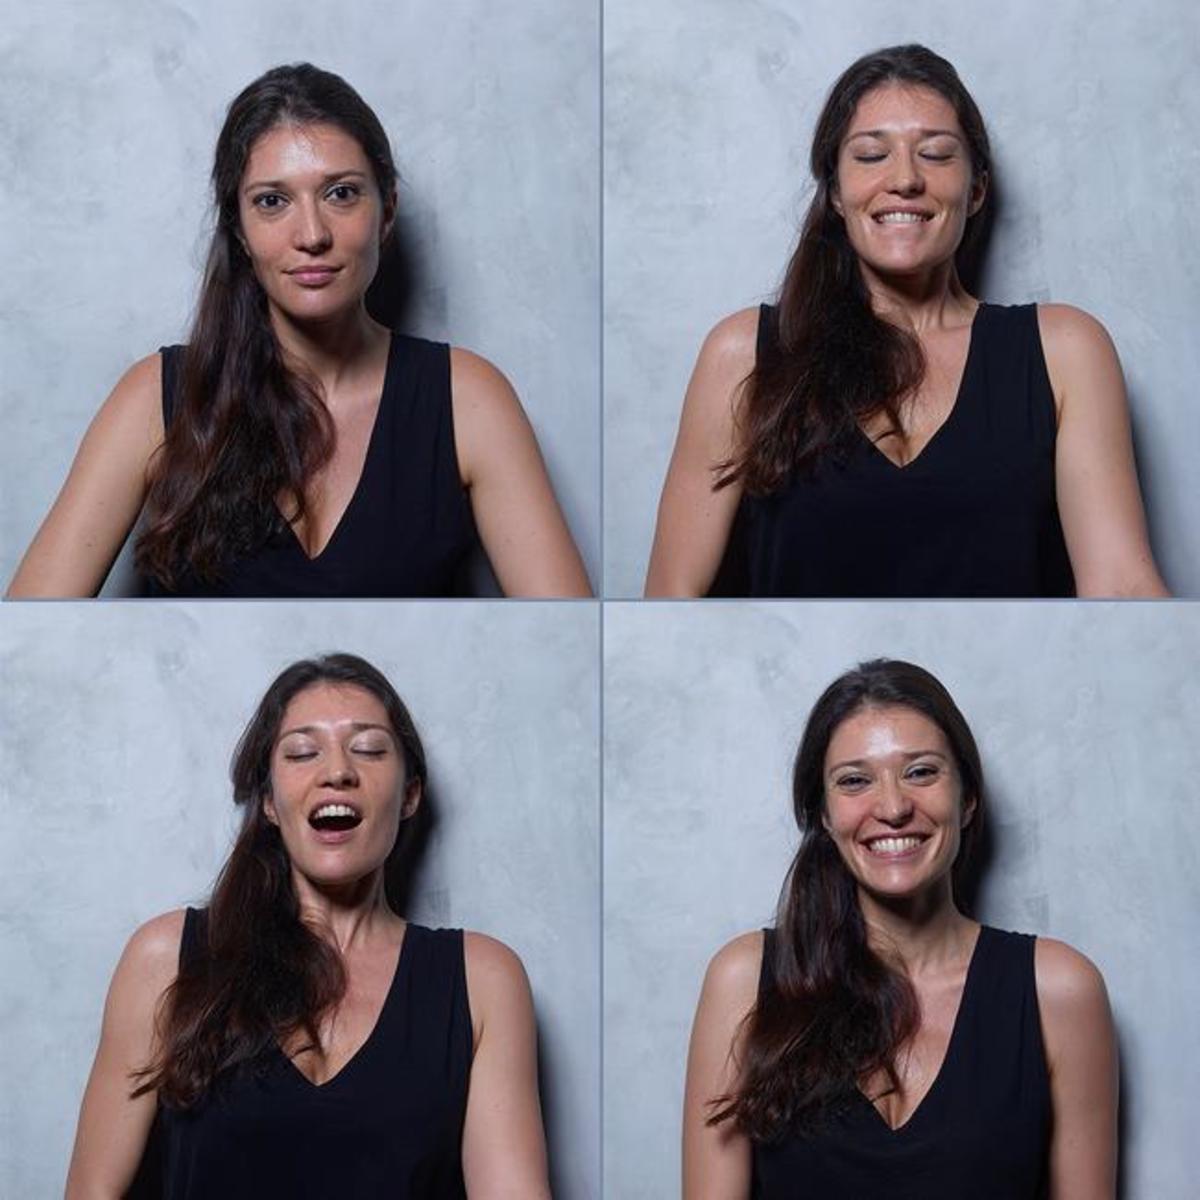 ‘The O Project’ by photographer Marcus Alberti captures women’s expressions before, during and after an orgasm.  